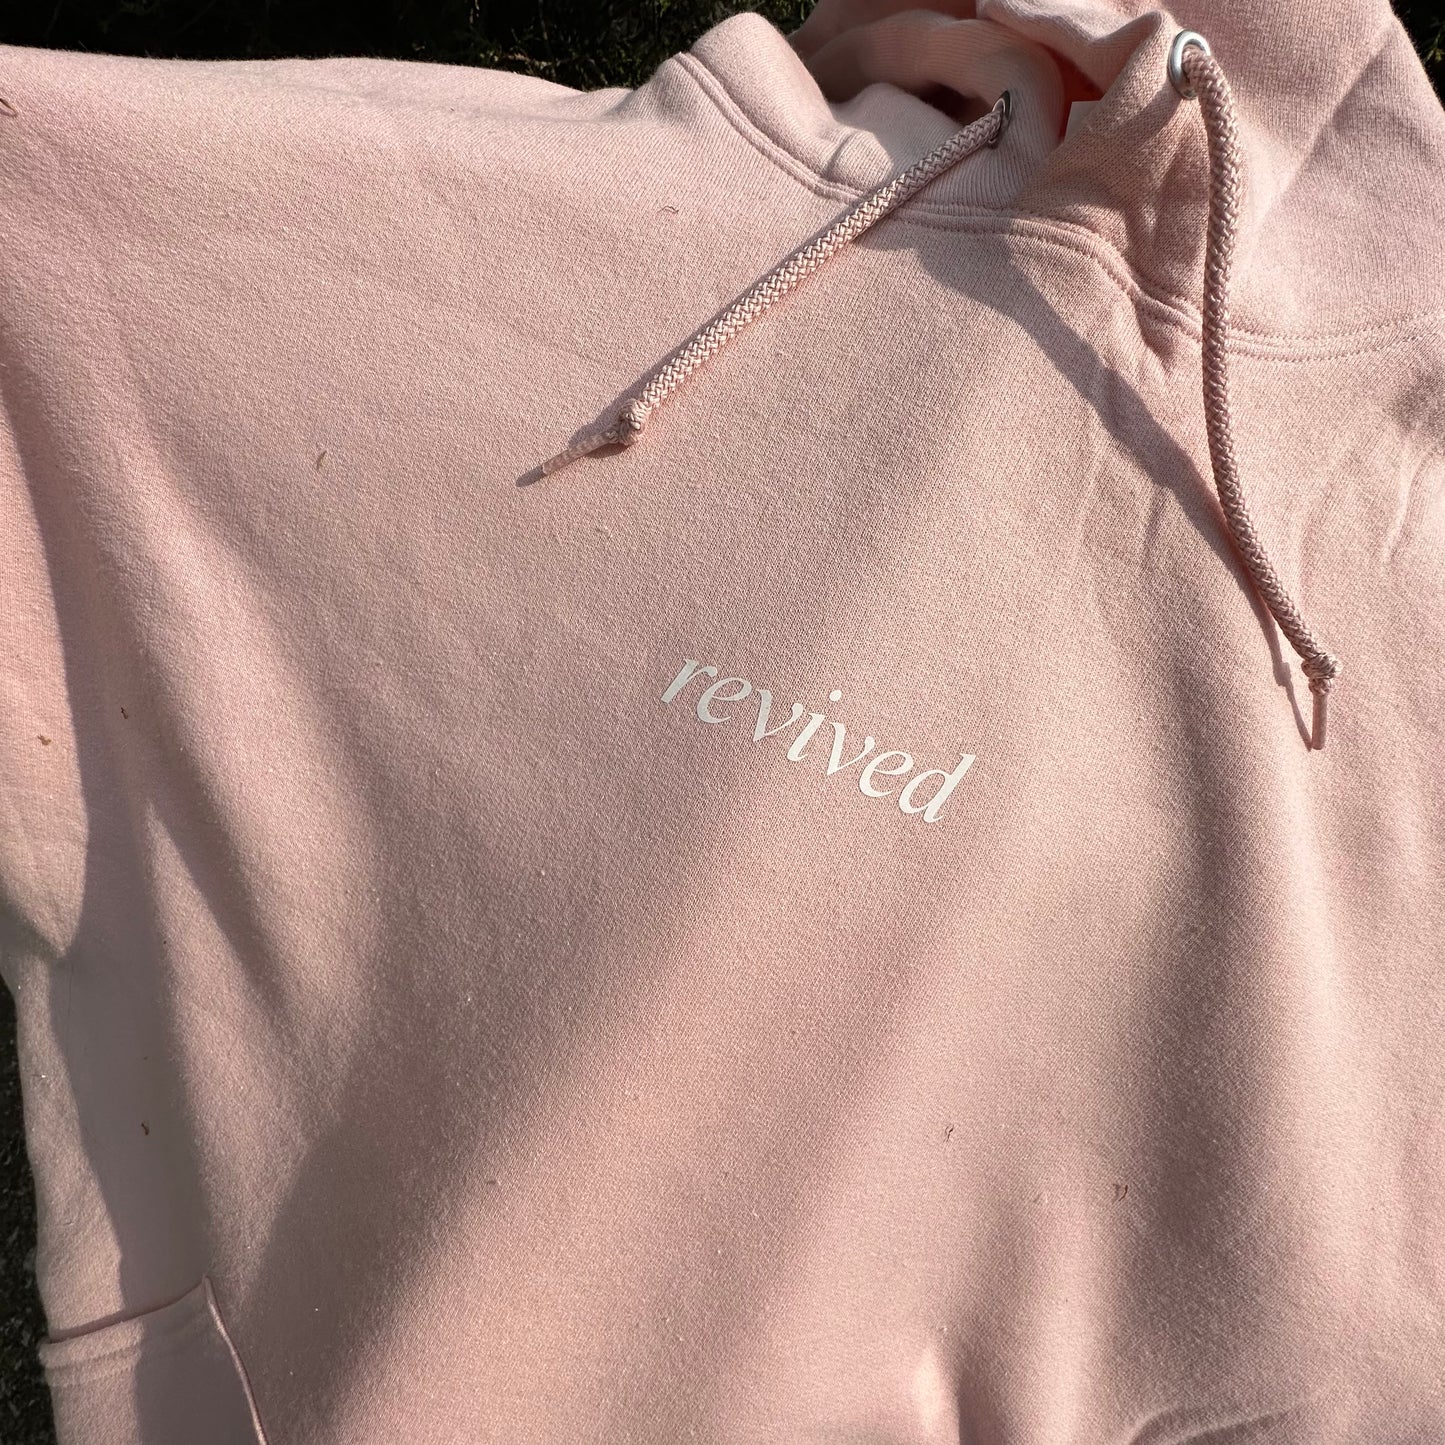 Collect Beautiful Moments Hoodie